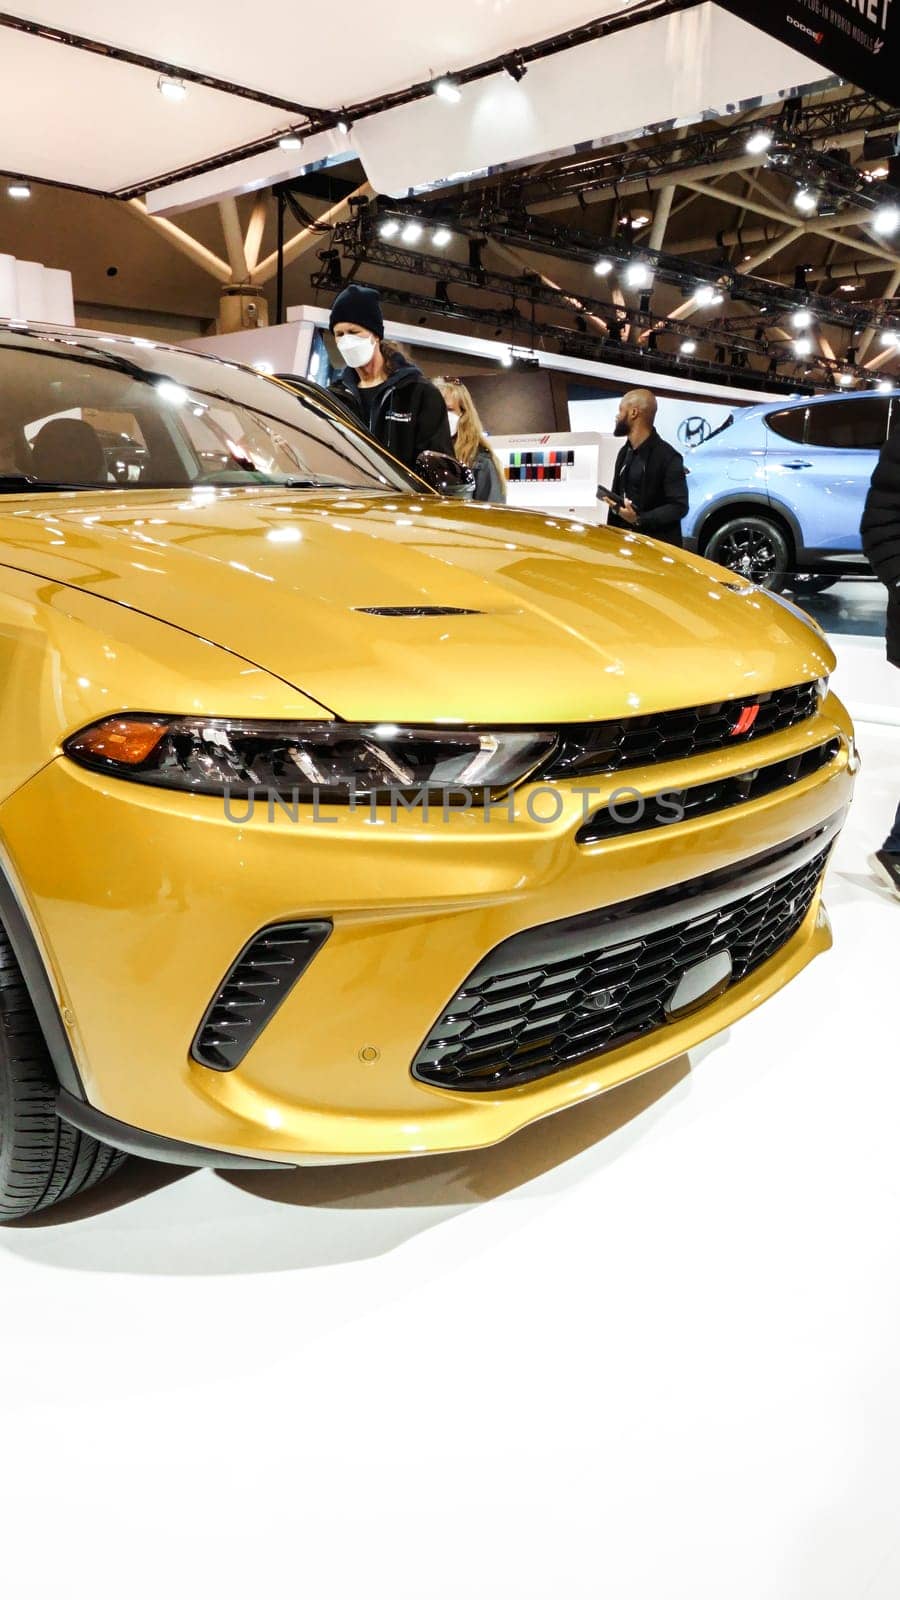 Close up view of yellow dodge GT car on display. Vertical. Crowds looking at new car models at Auto show. National Canadian Auto Show with many car brands. Toronto ON Canada Feb 19, 2023. by JuliaDorian